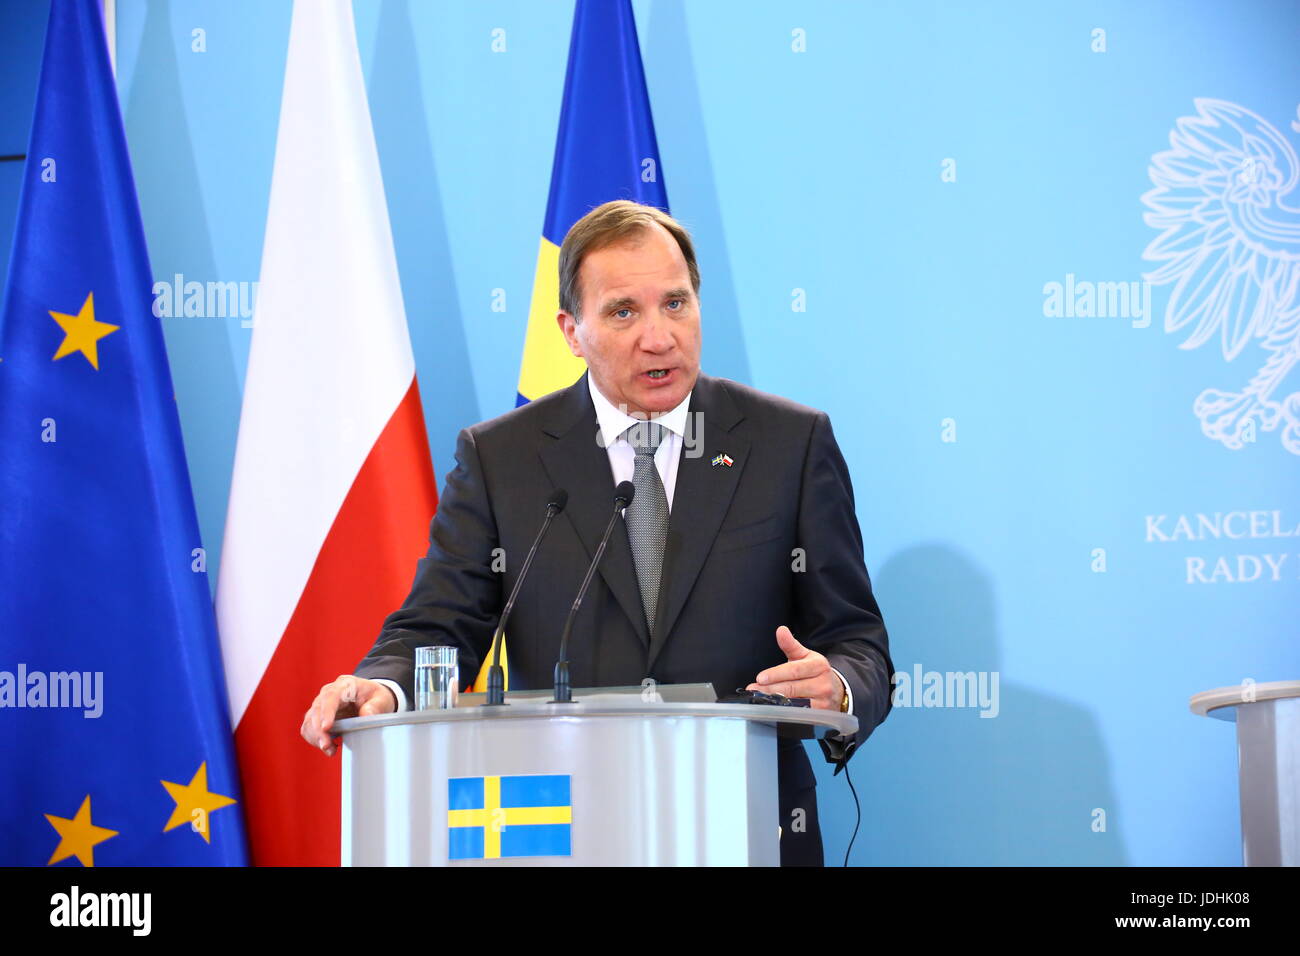 Warsaw, Poland. 20th June, 2017. Prime Minister Beata Szydlo leads press briefing with Swedish Prime Minister Stefan Löfven during his official state visit. Credit: Jakob Ratz/Pacific Press/Alamy Live News Stock Photo